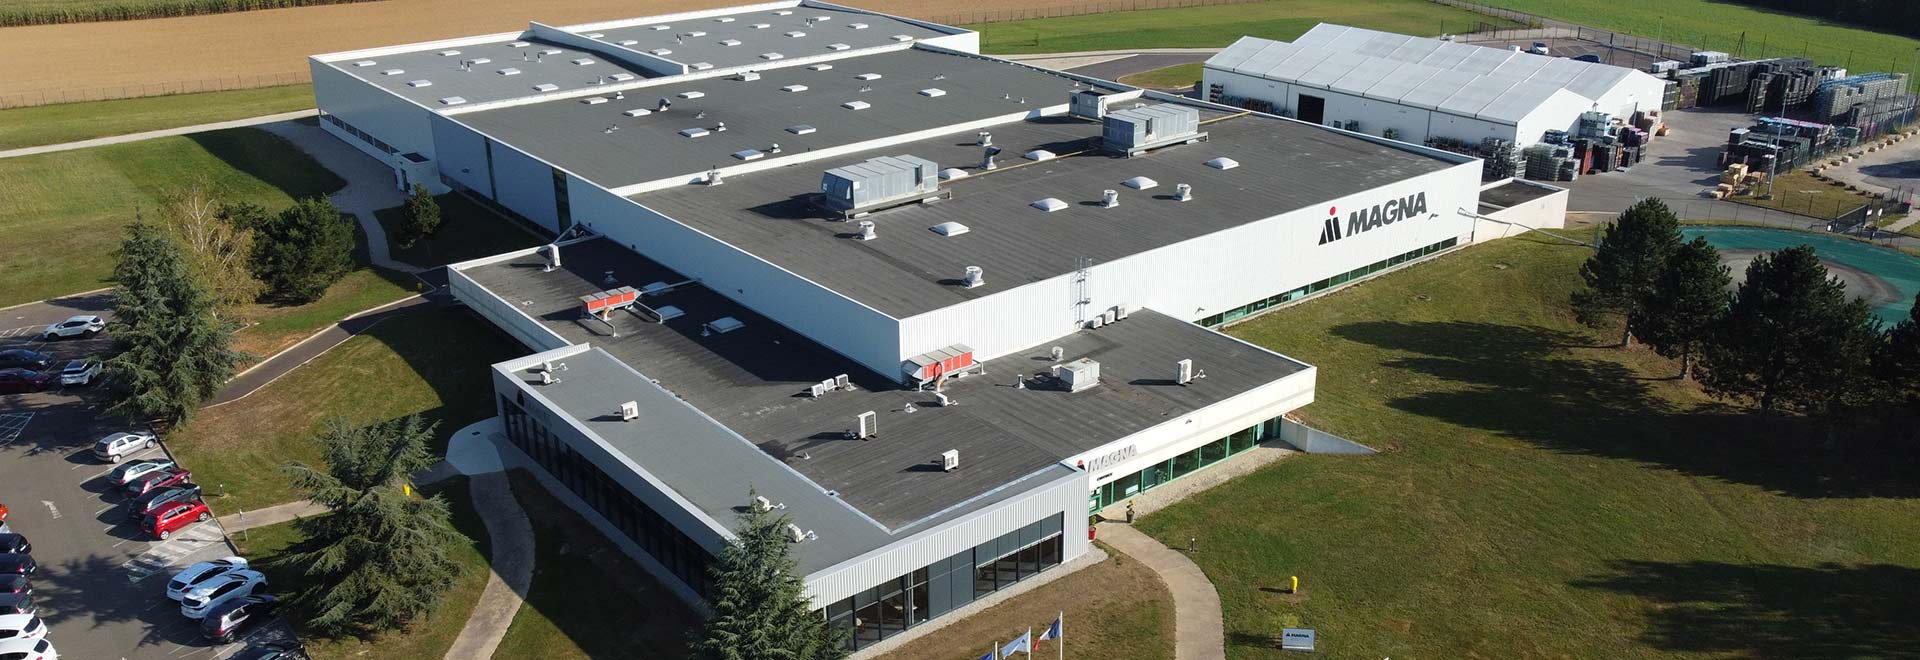 Overhead view of Magna facility in Langres, France